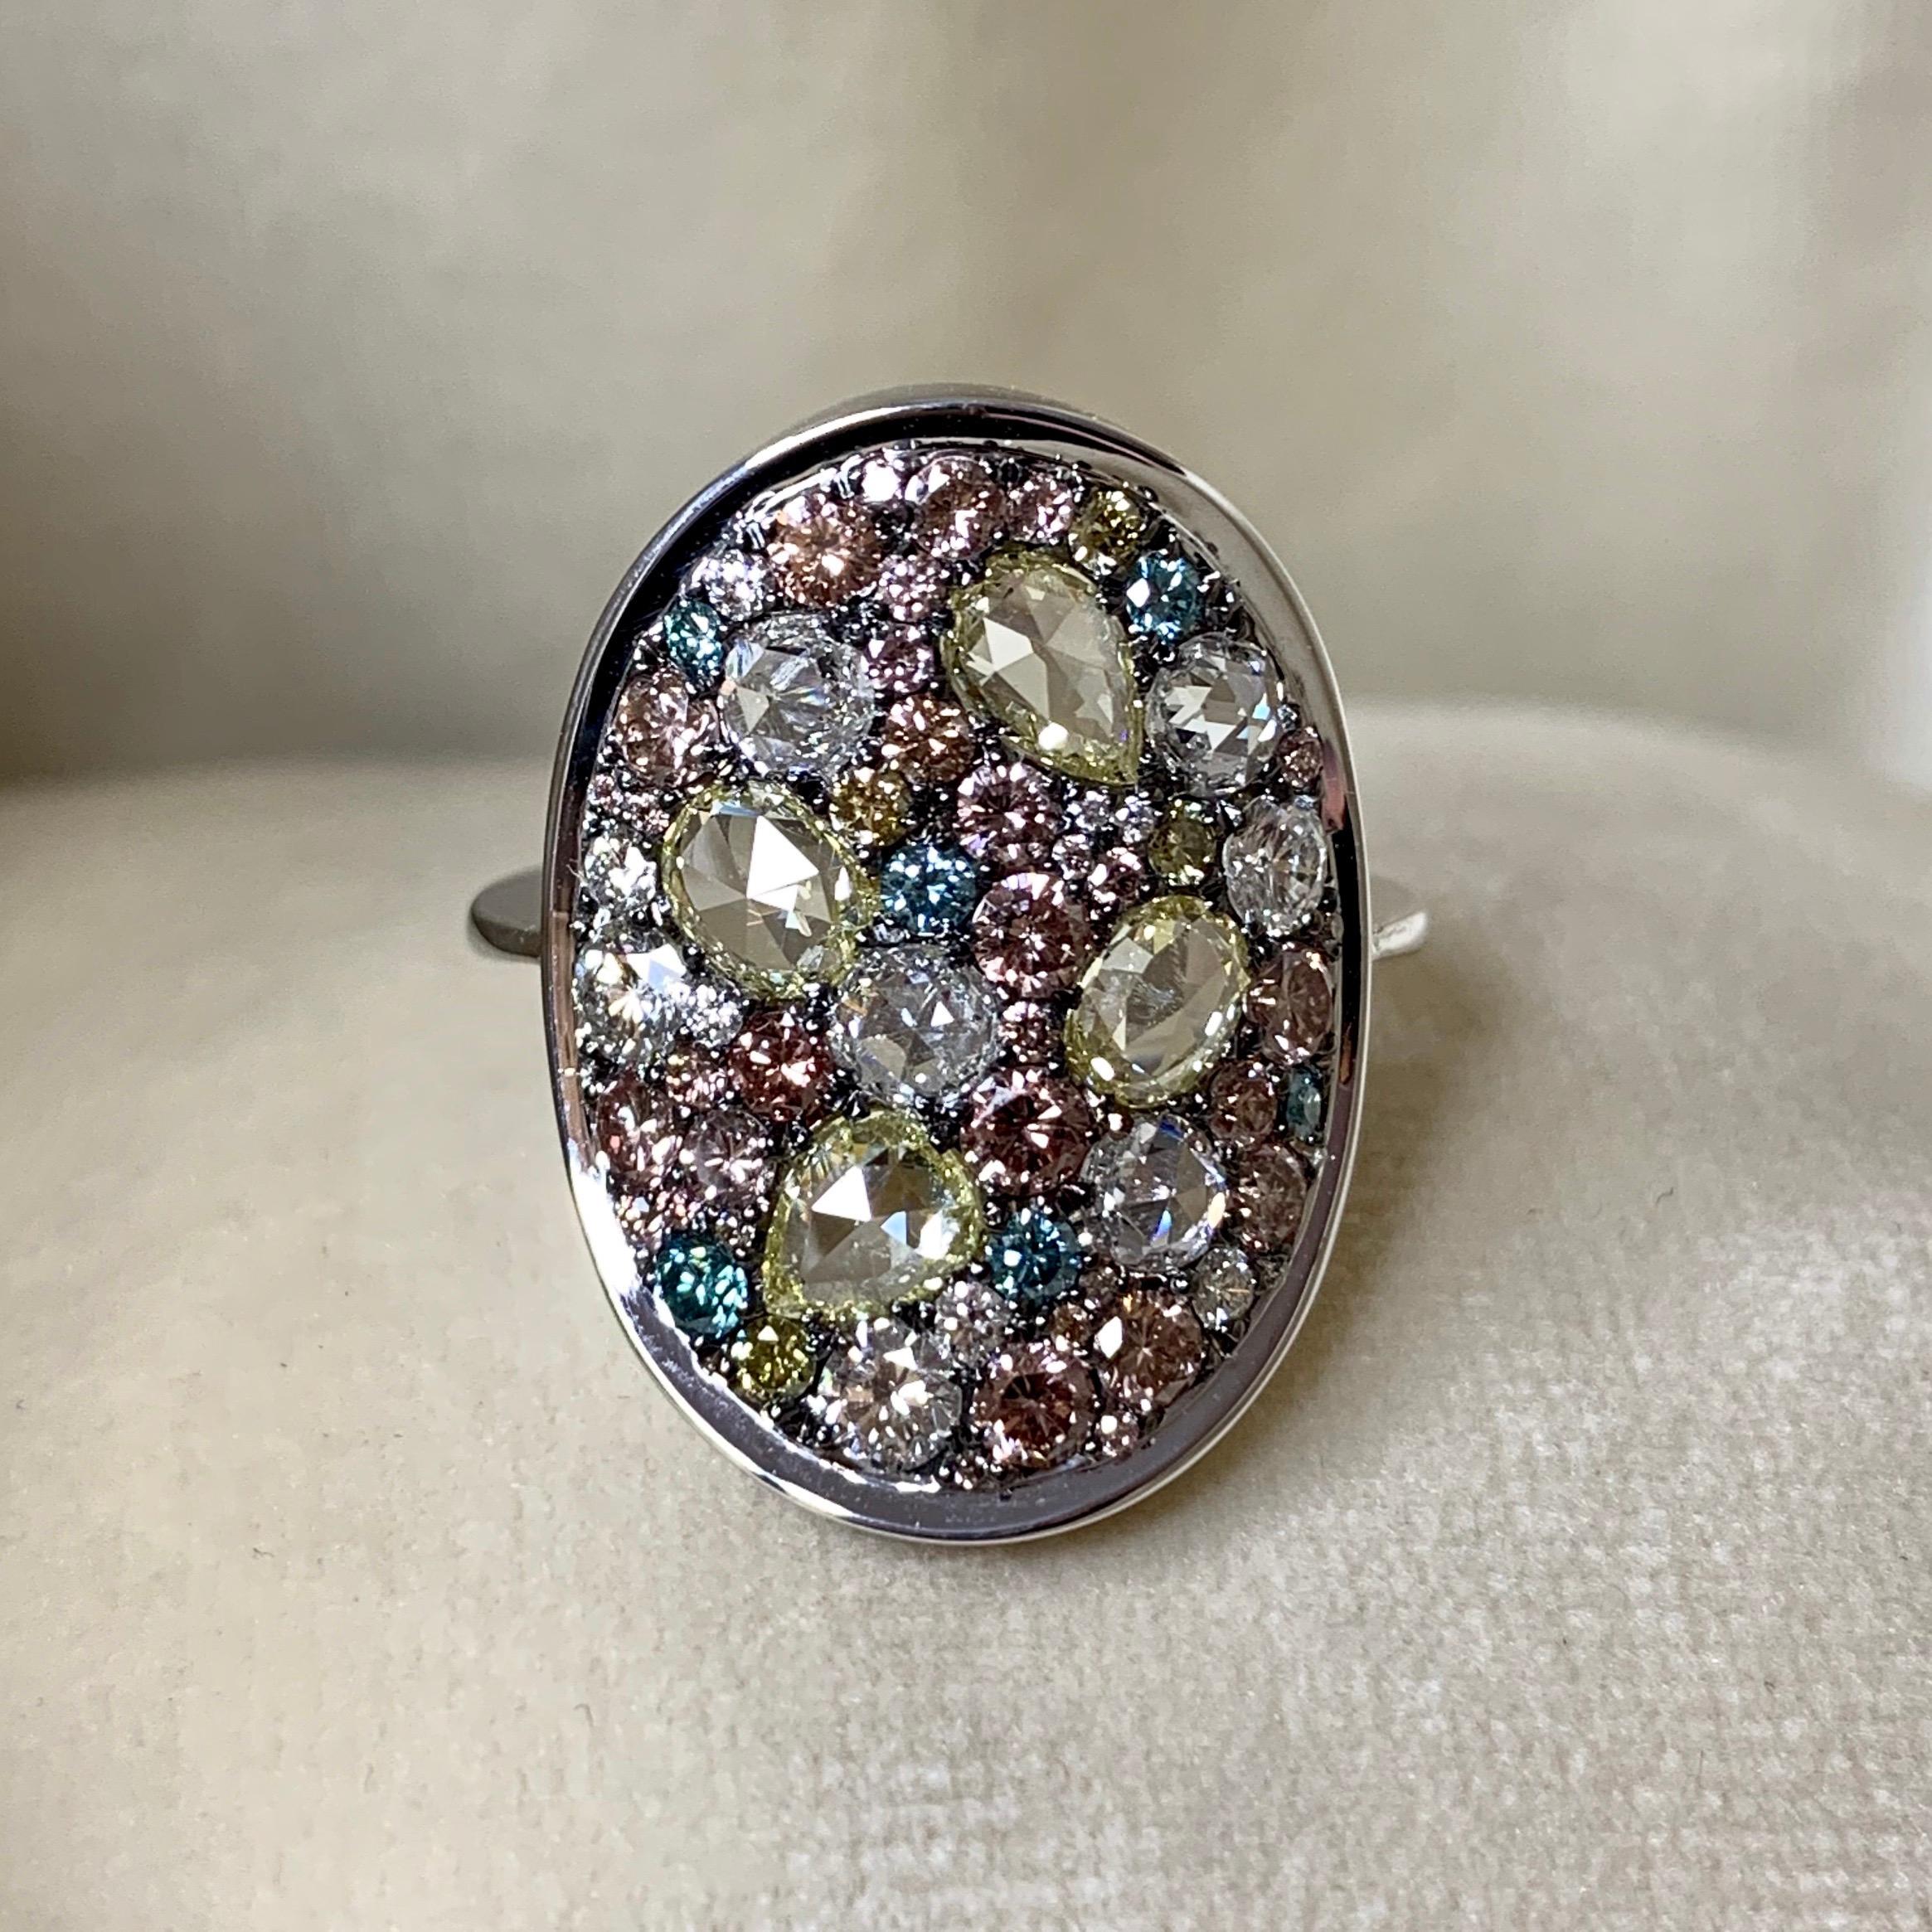 One of a kind ring in 18K white gold 6,4 g & blackened sterling silver (The stones are set on silver to create a black background for the stones)
Set with Fancy yellow & white rose-cut diamonds, Fancy chocolate pink, yellow, white DEGVVS,  Natural